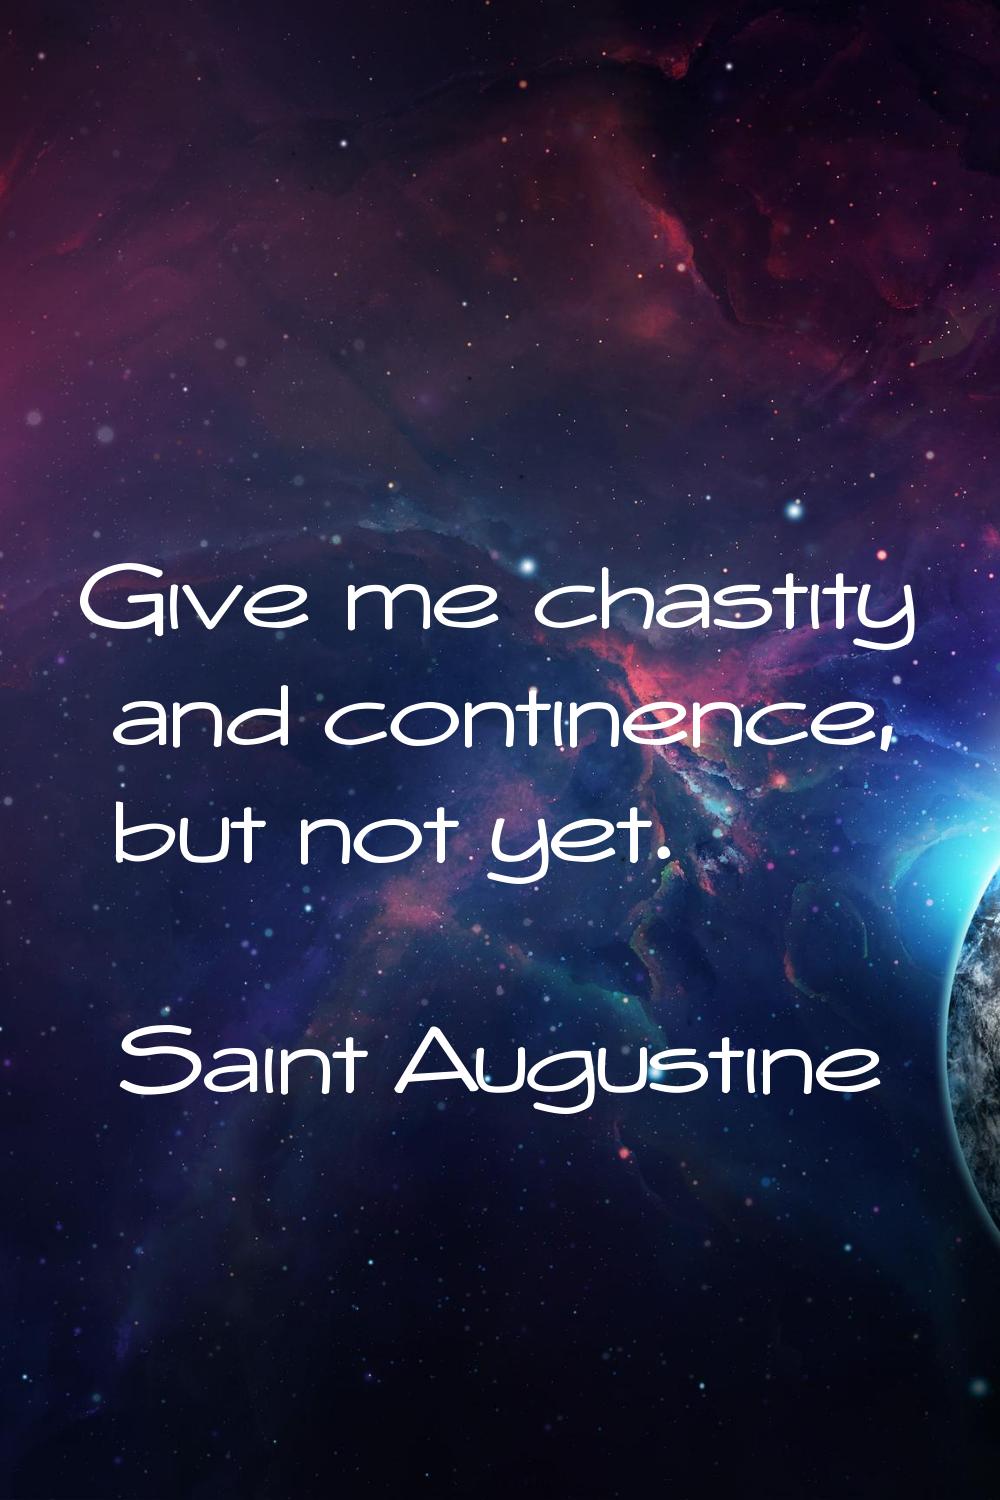 Give me chastity and continence, but not yet.